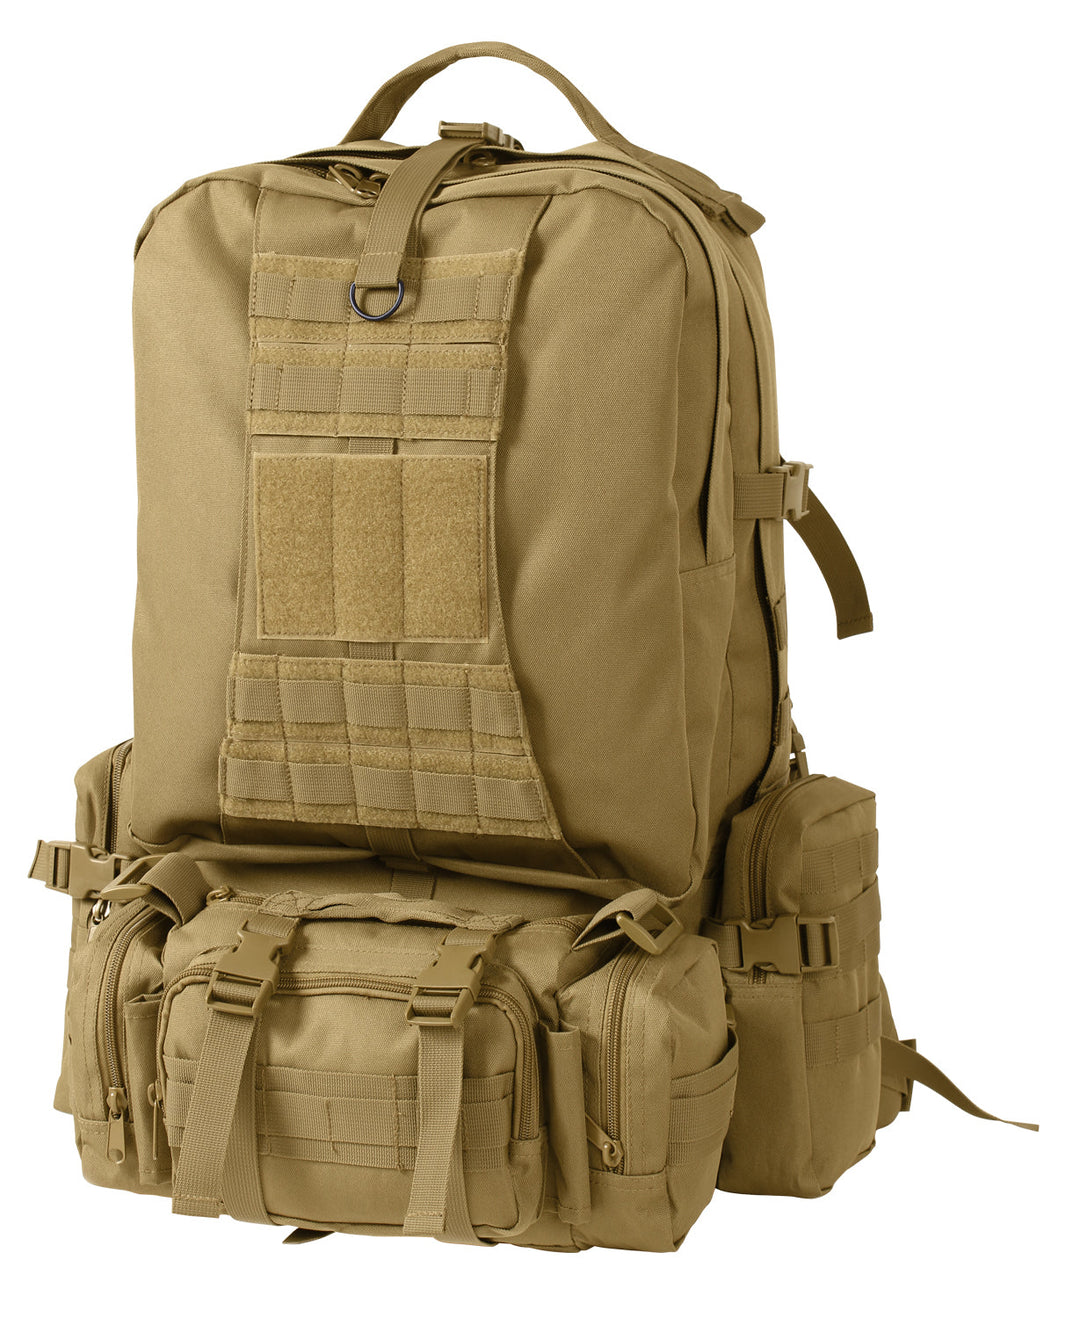 Rothco Global Assault Pack Color Coyote - Final Sale Ships Same Day